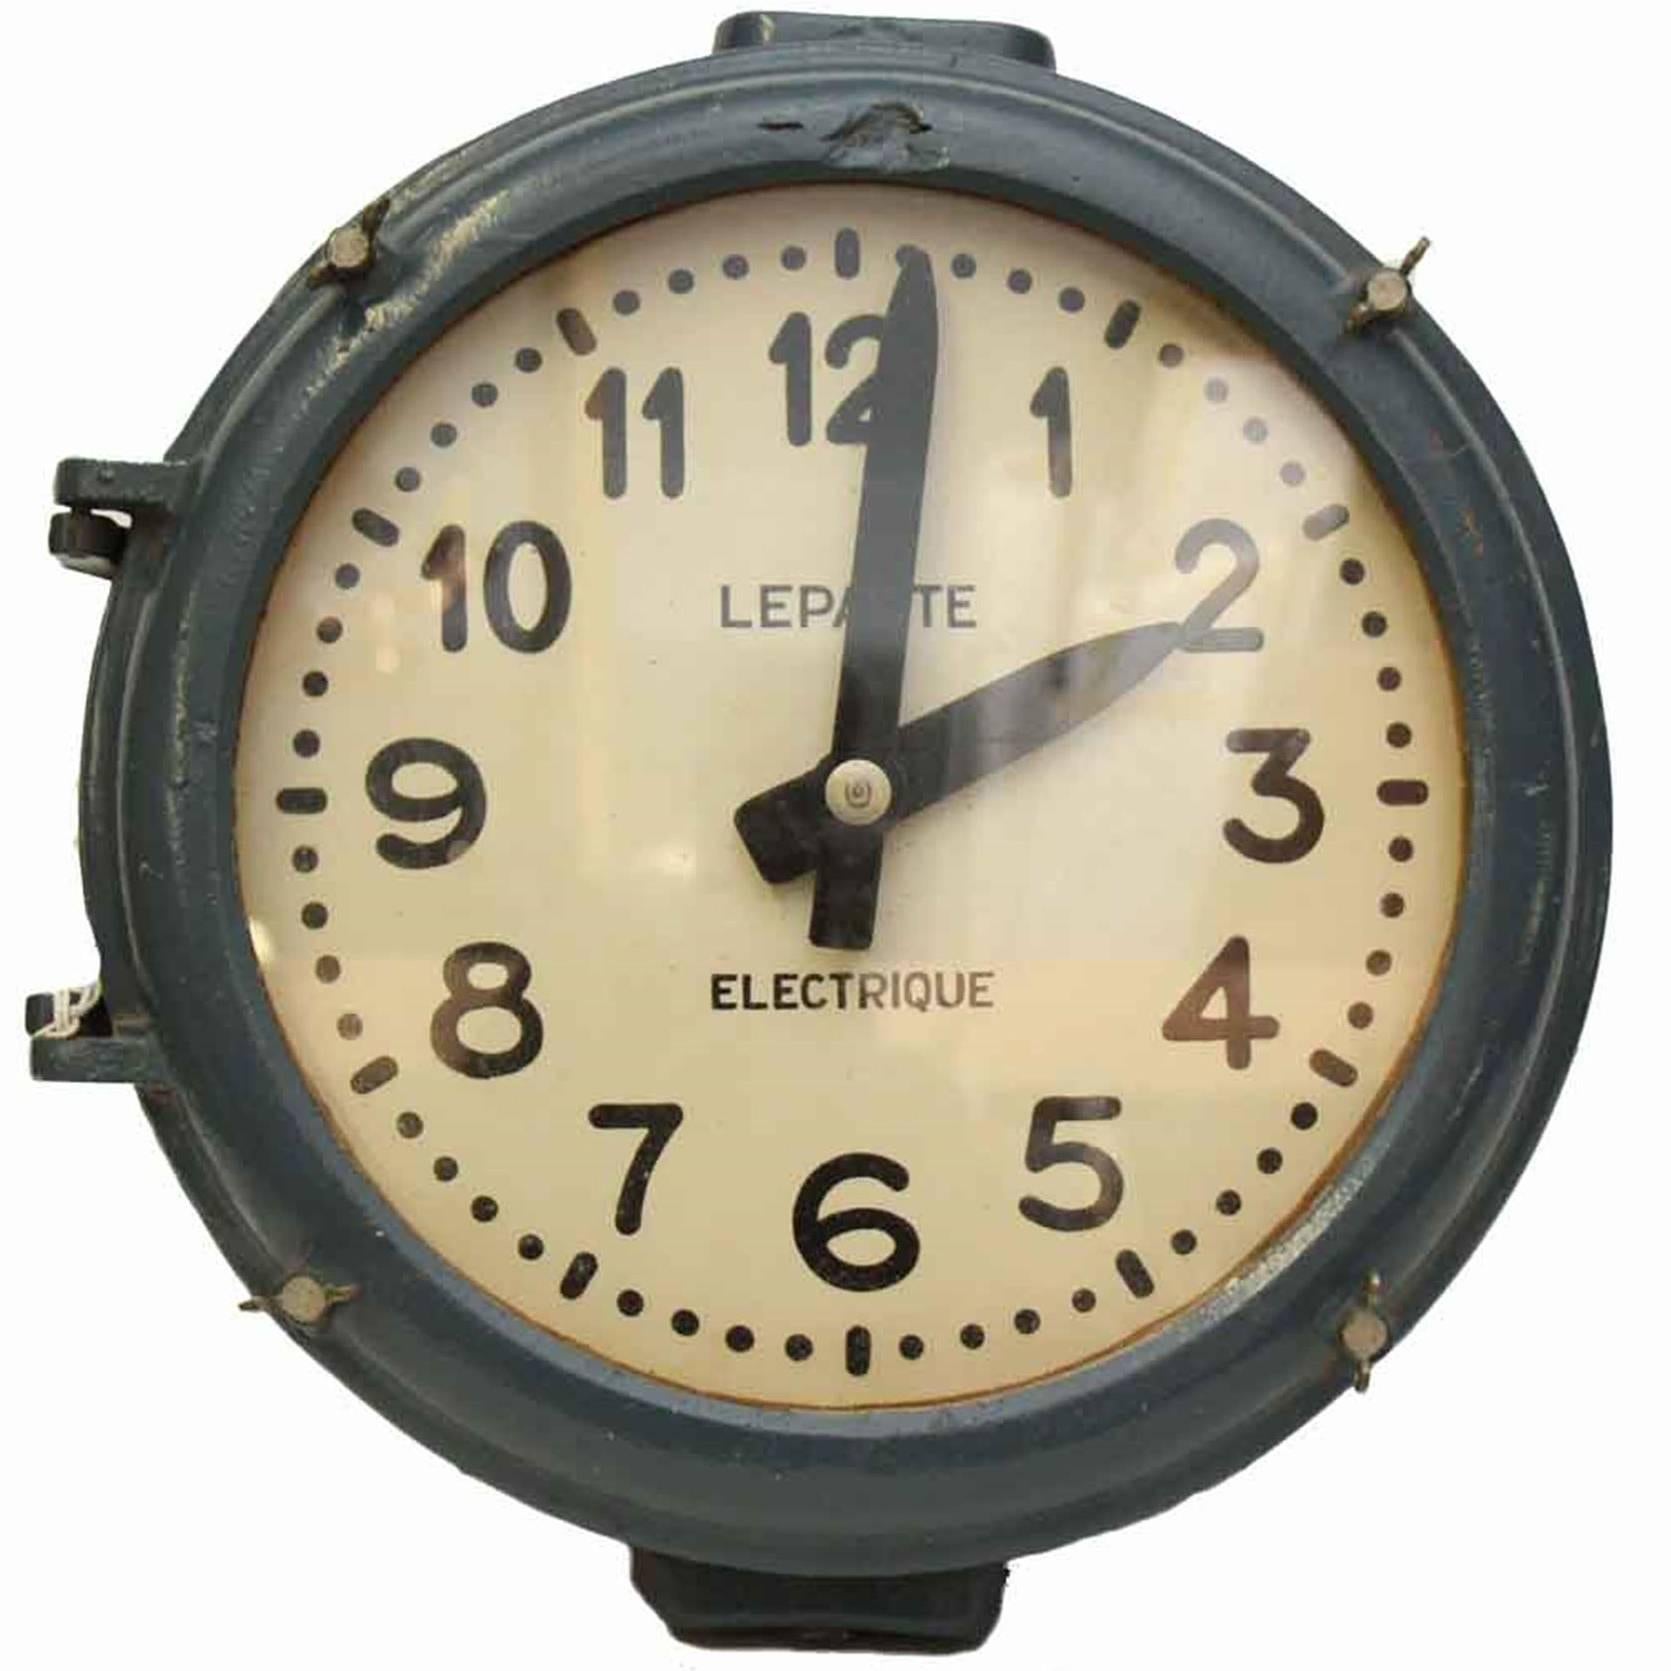 1950s Nautical Cast Iron Blue Industrial Wall Clock from France